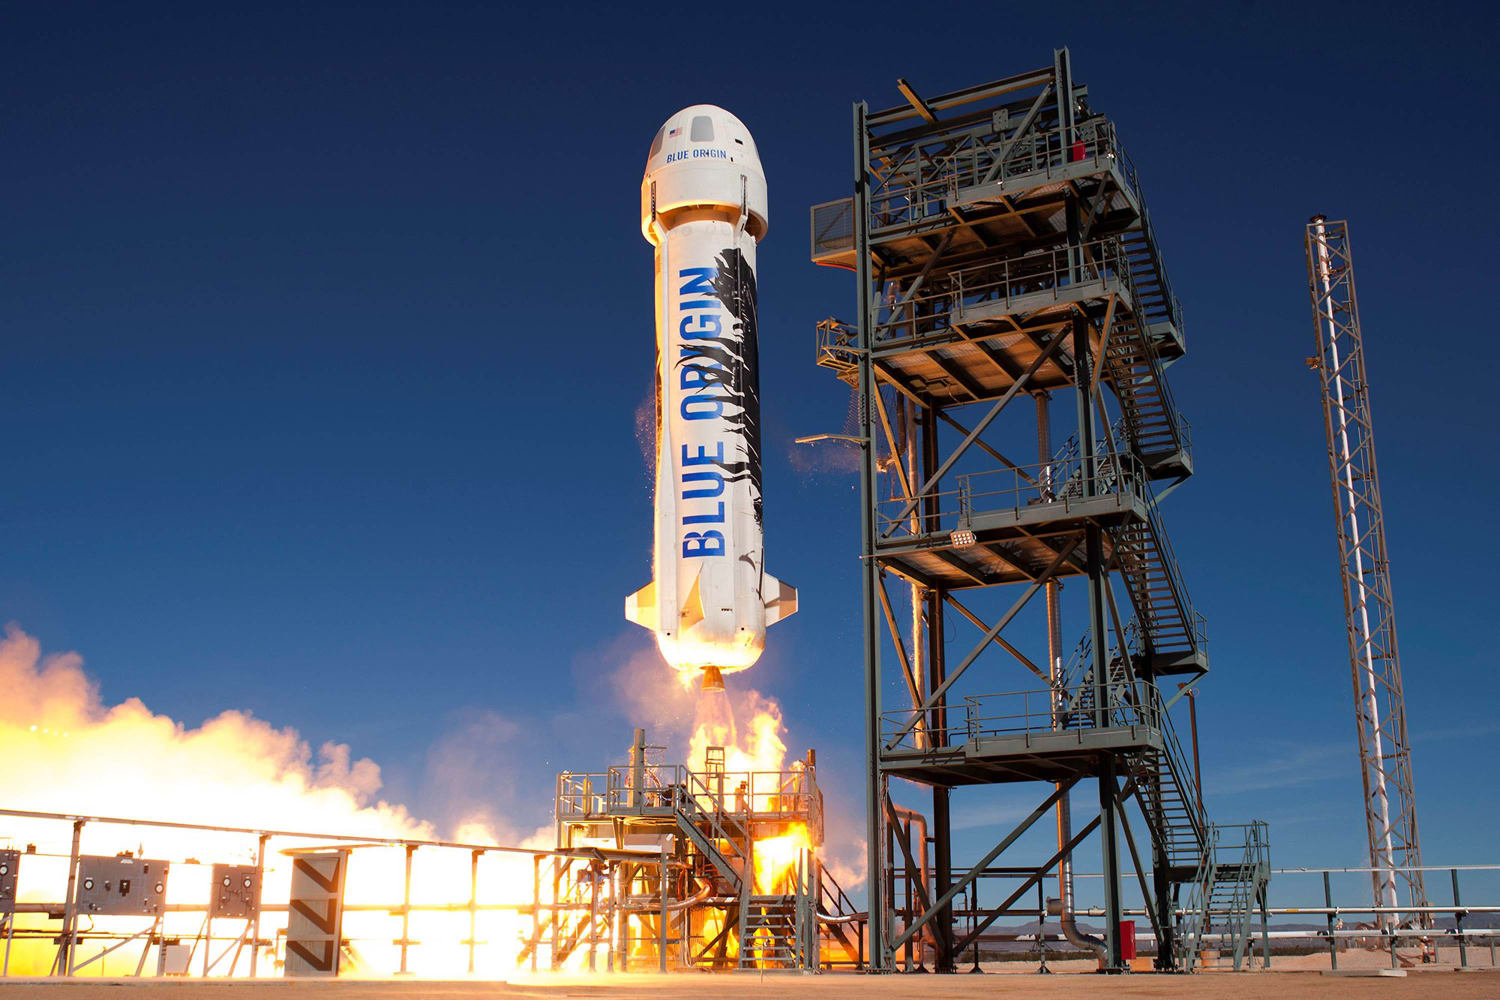 Blue Origin shows interest in national security launches - SpaceNews